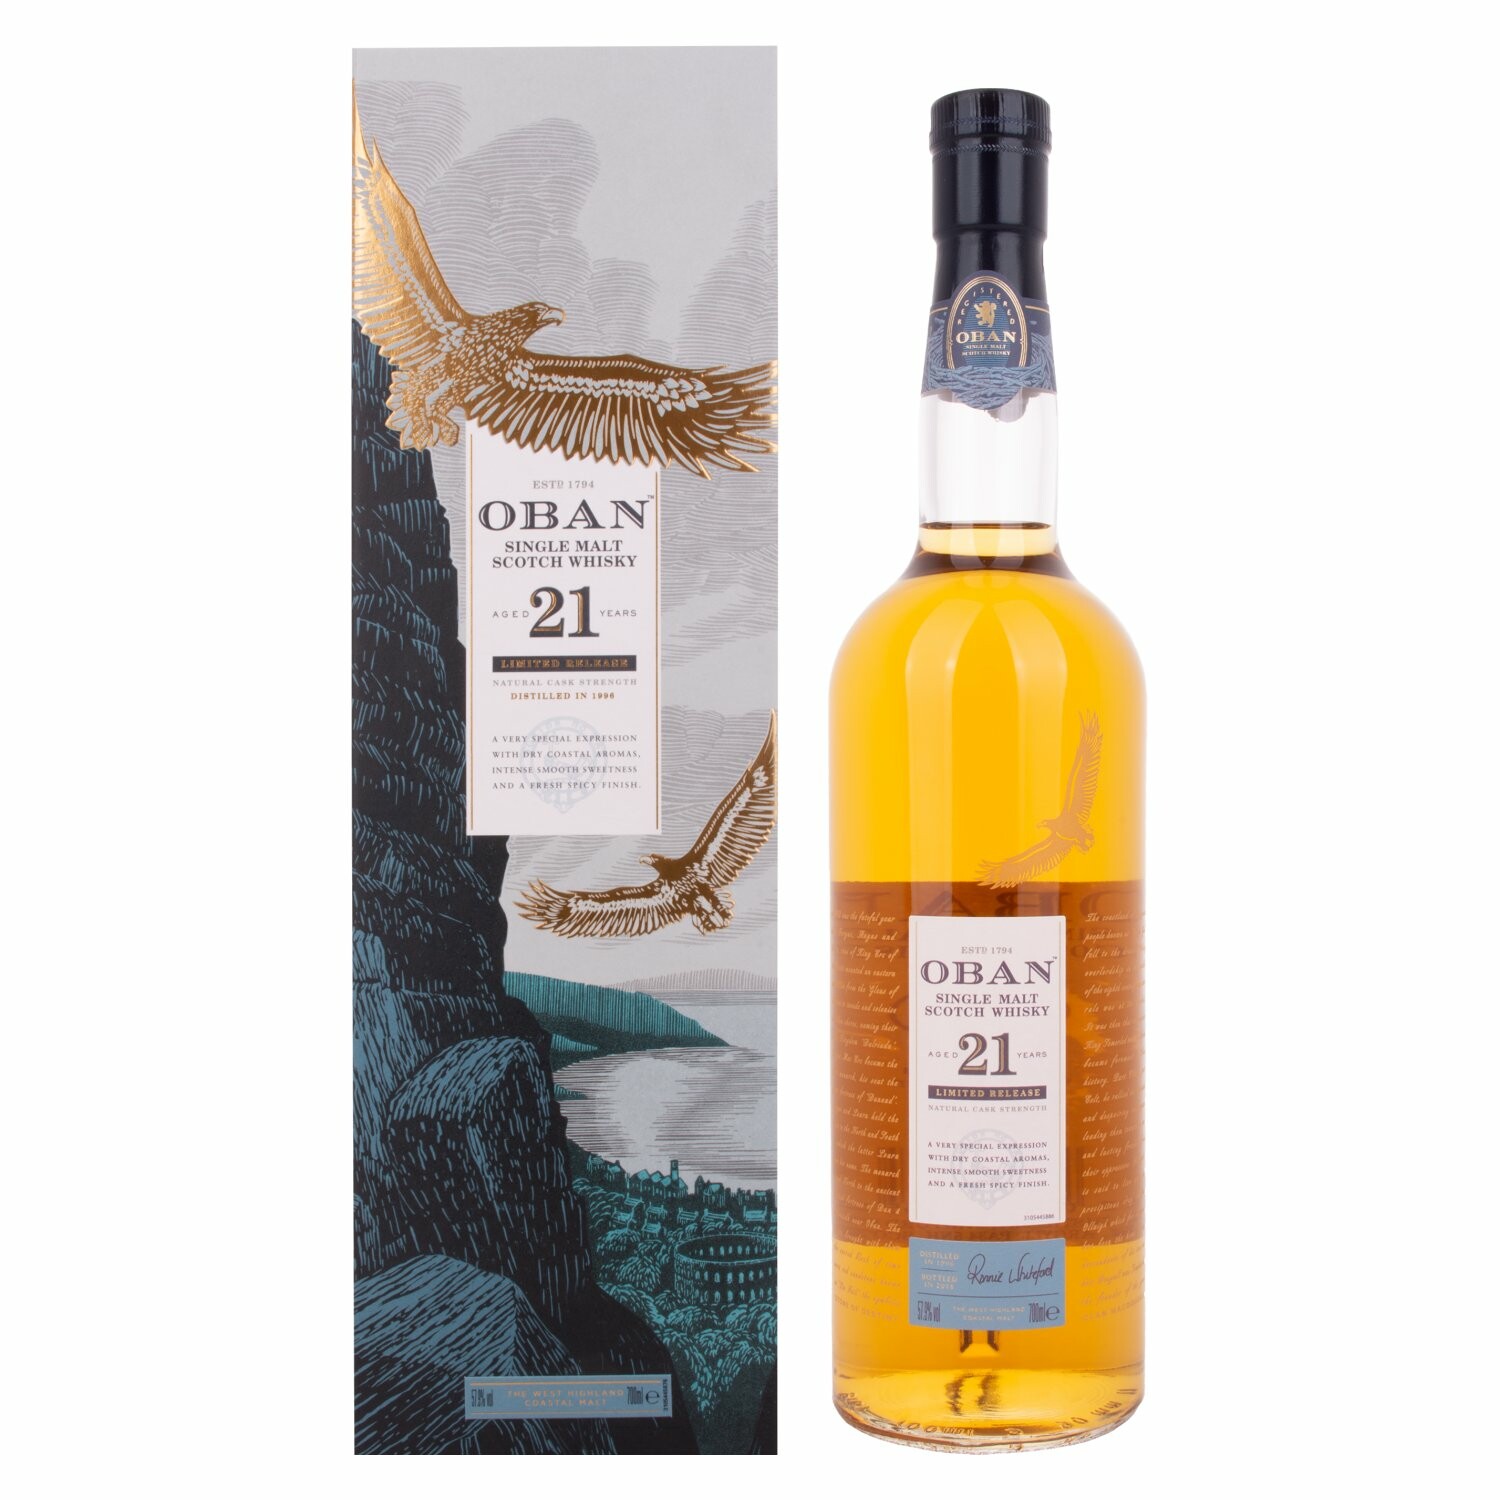 Oban 21 Years Old Single Malt Limited Release 2018 57,9% Vol. 0,7l in Giftbox